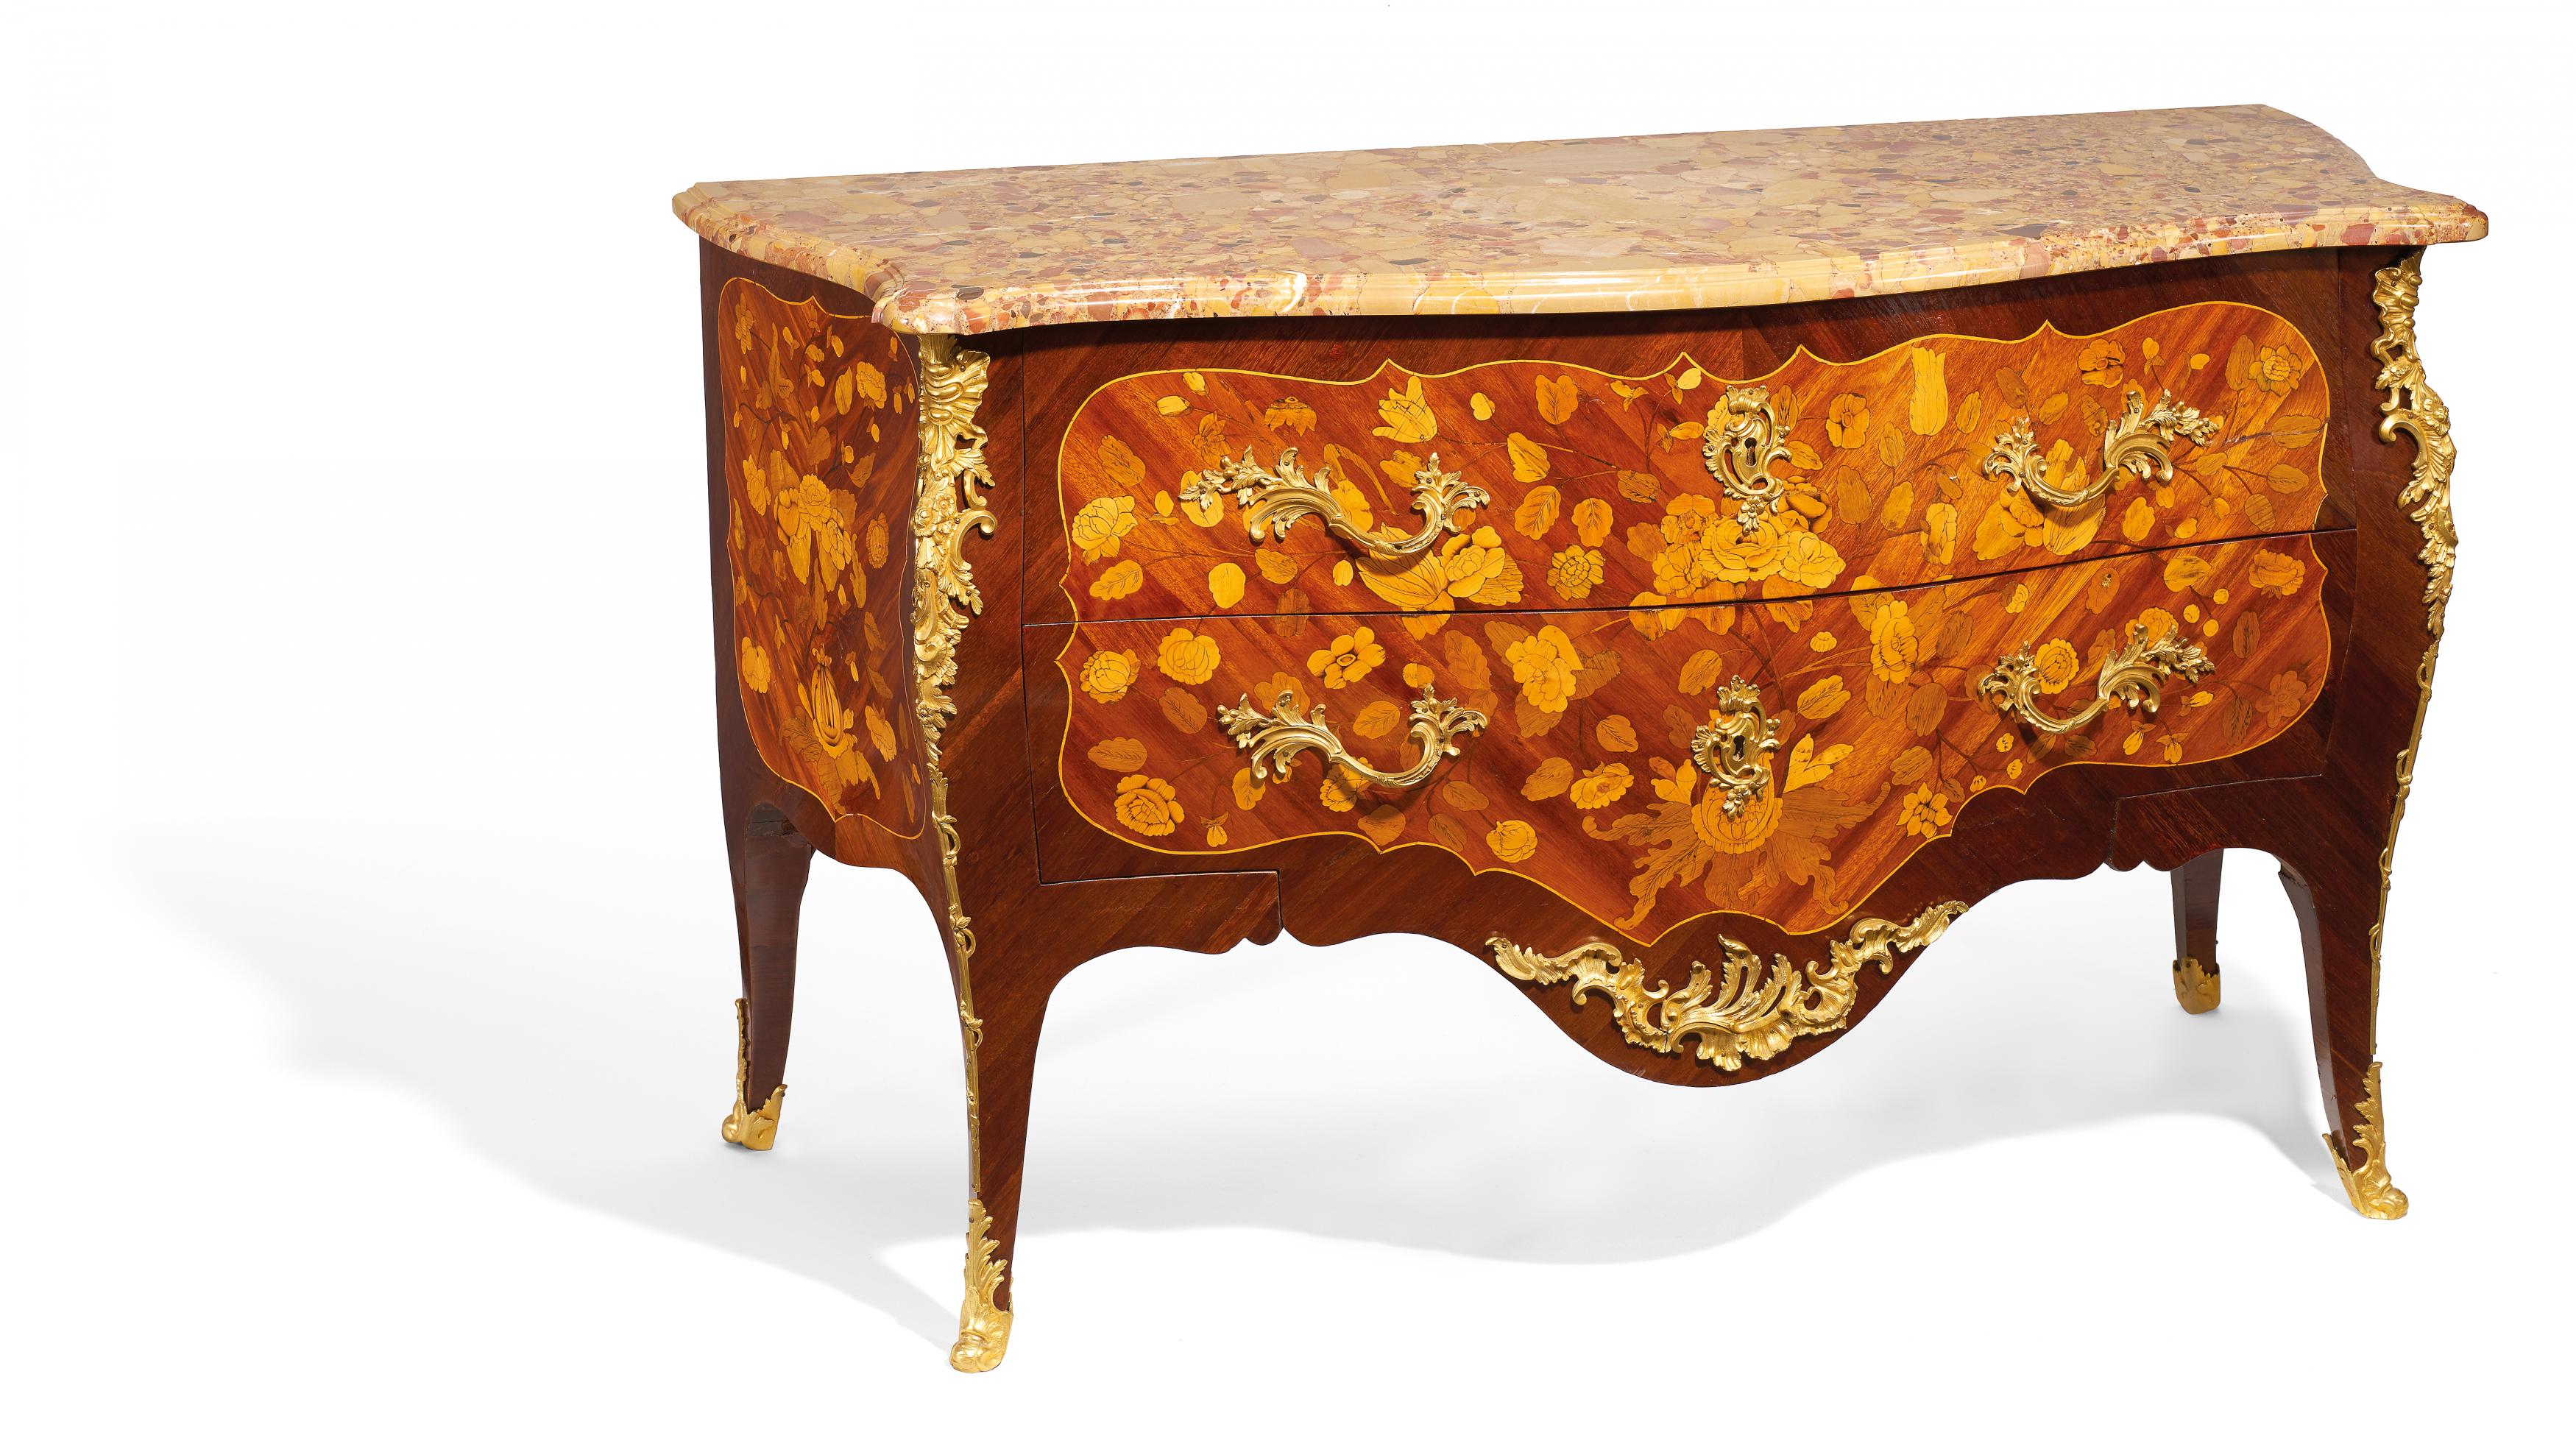 GILT-BRONZE MOUNTED KINGWOOD COMMODE LOUIS XV WITH MARBLE TOP. Paris. Ca. 1750. Mathieu Criaerd. - Image 2 of 2